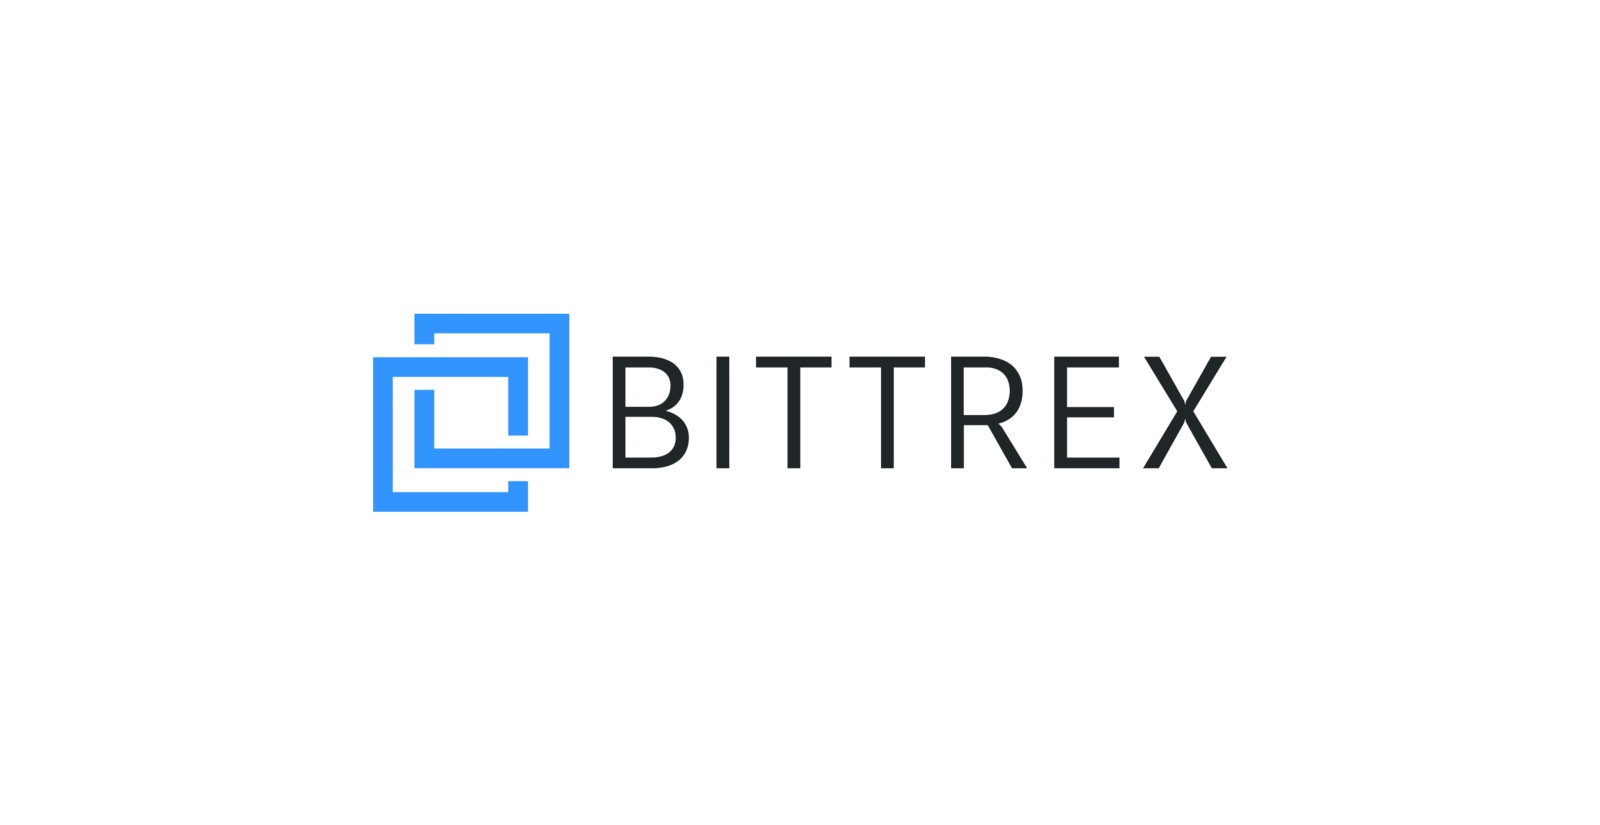 Bittrex Bows Out: Customers Advised to Withdraw Funds Amid Planned Closure